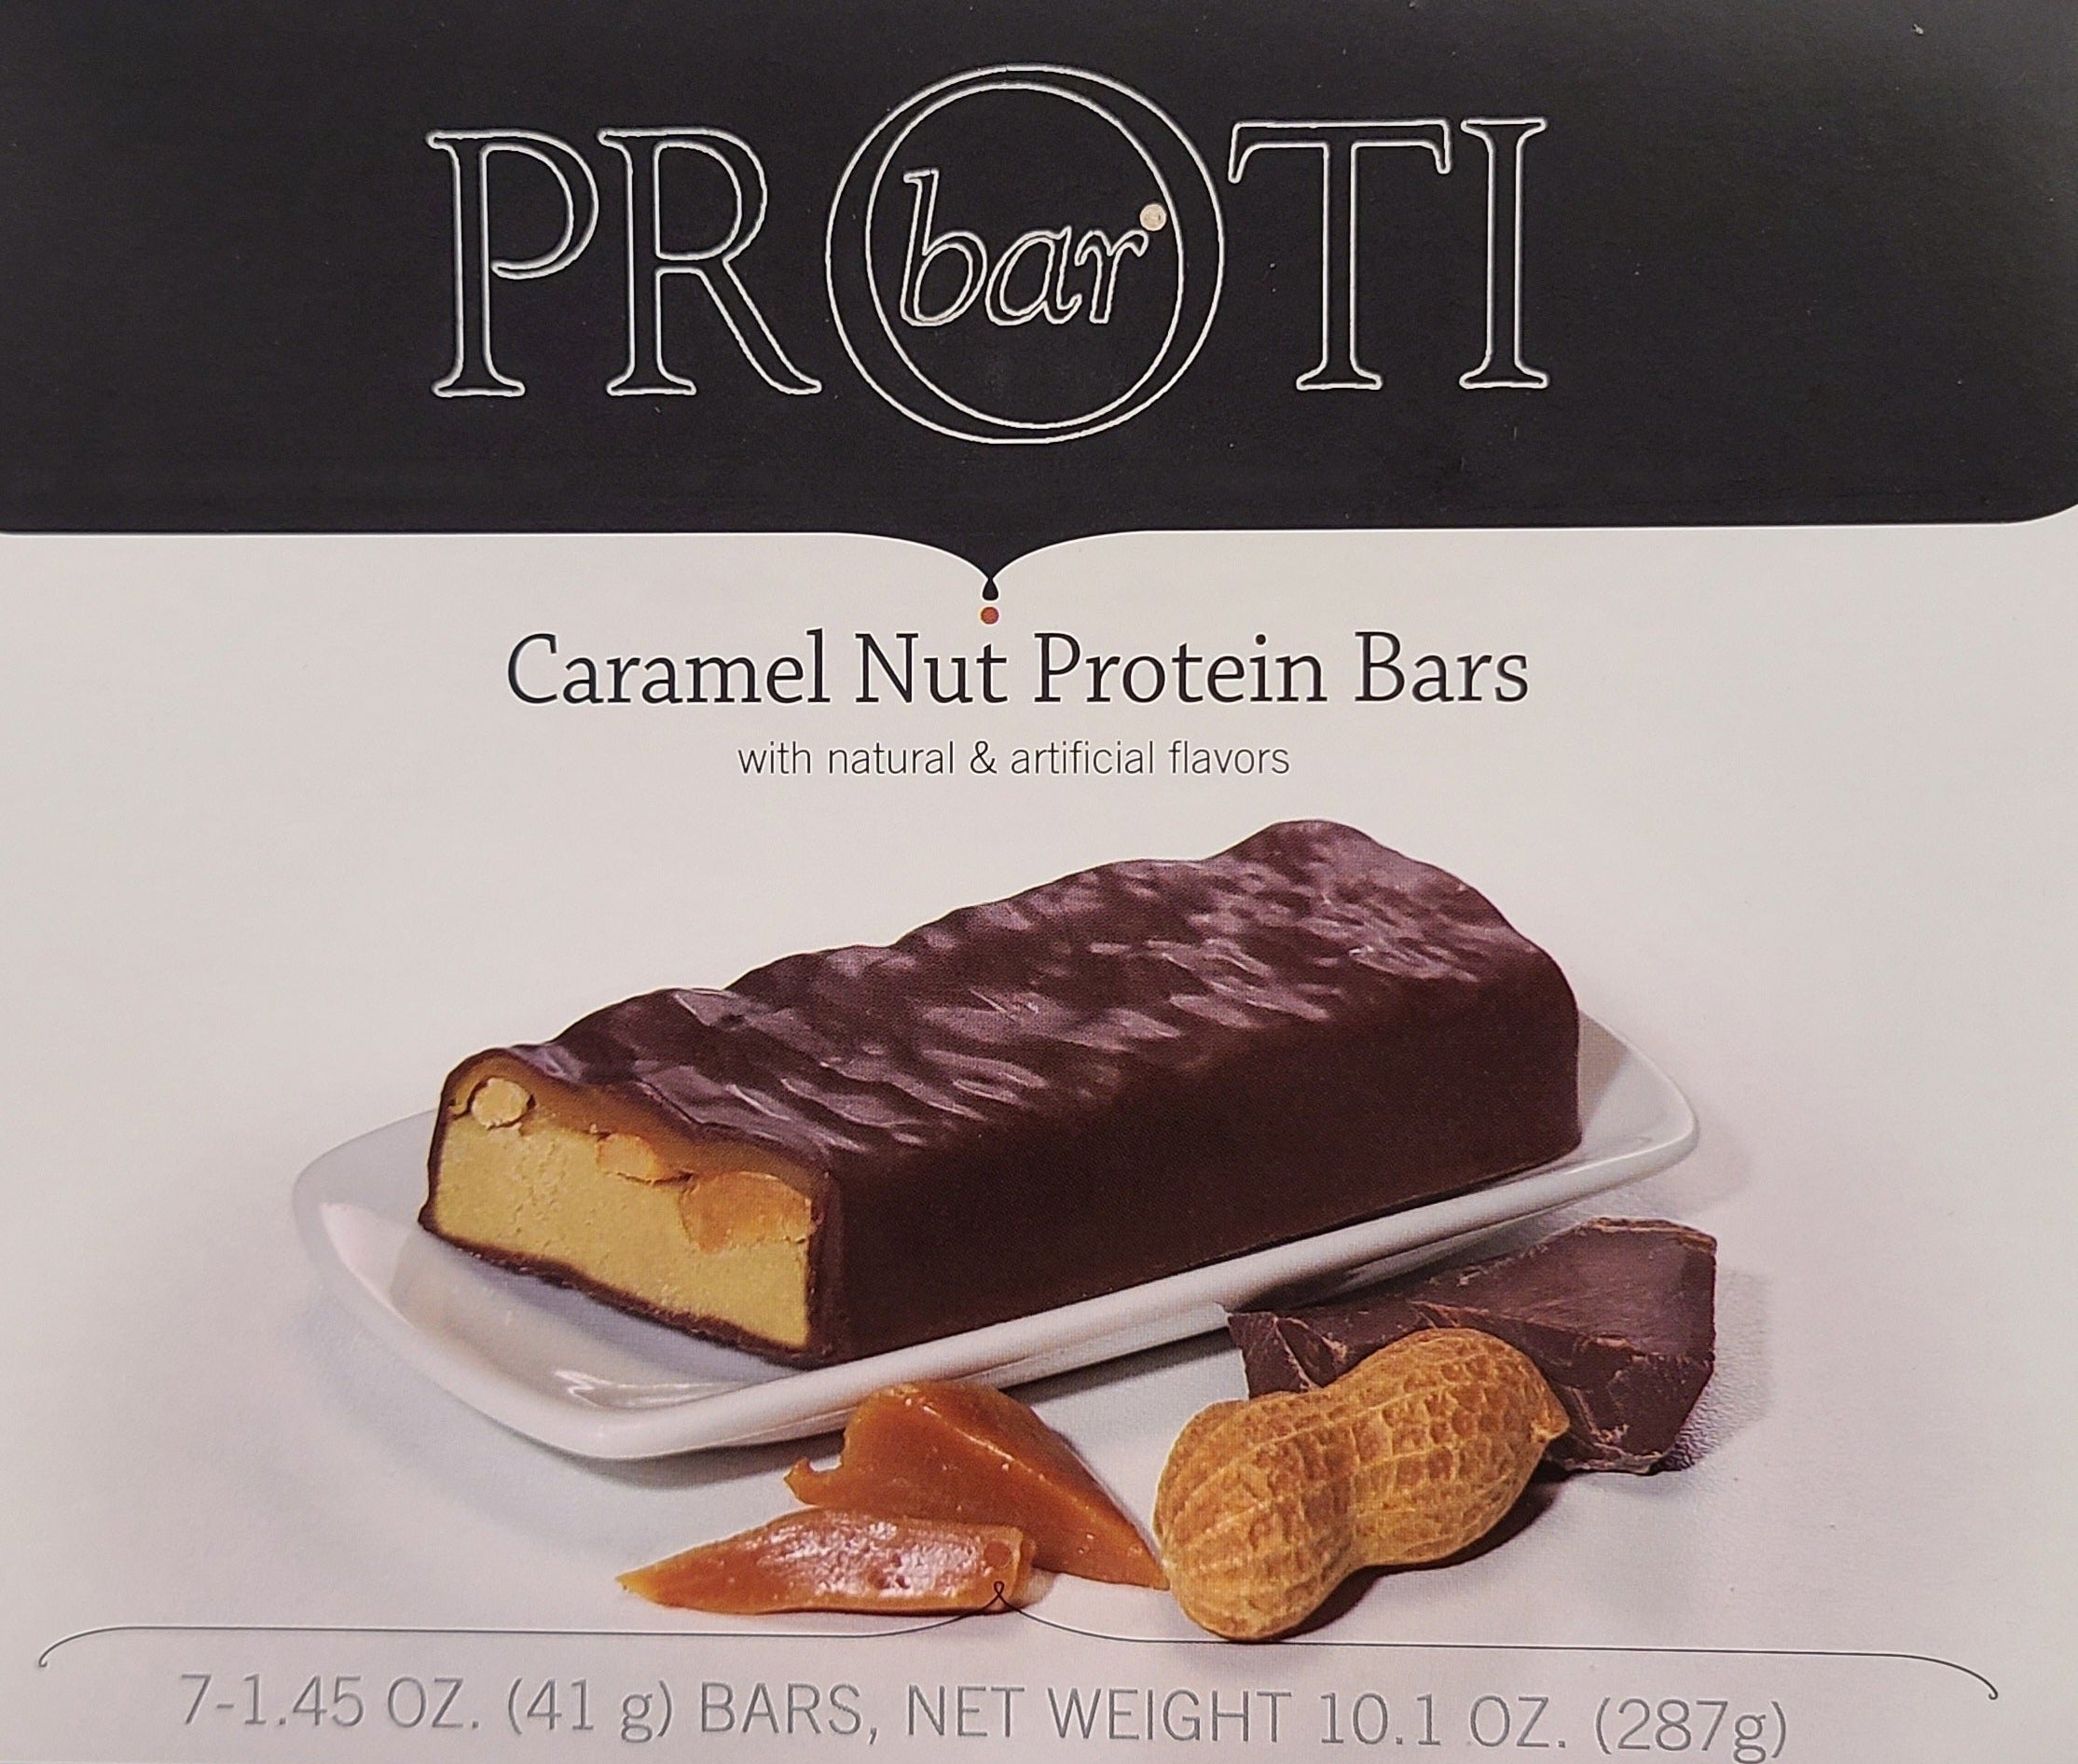 Bariatric Protein Bars for Weight Loss - Celebrate